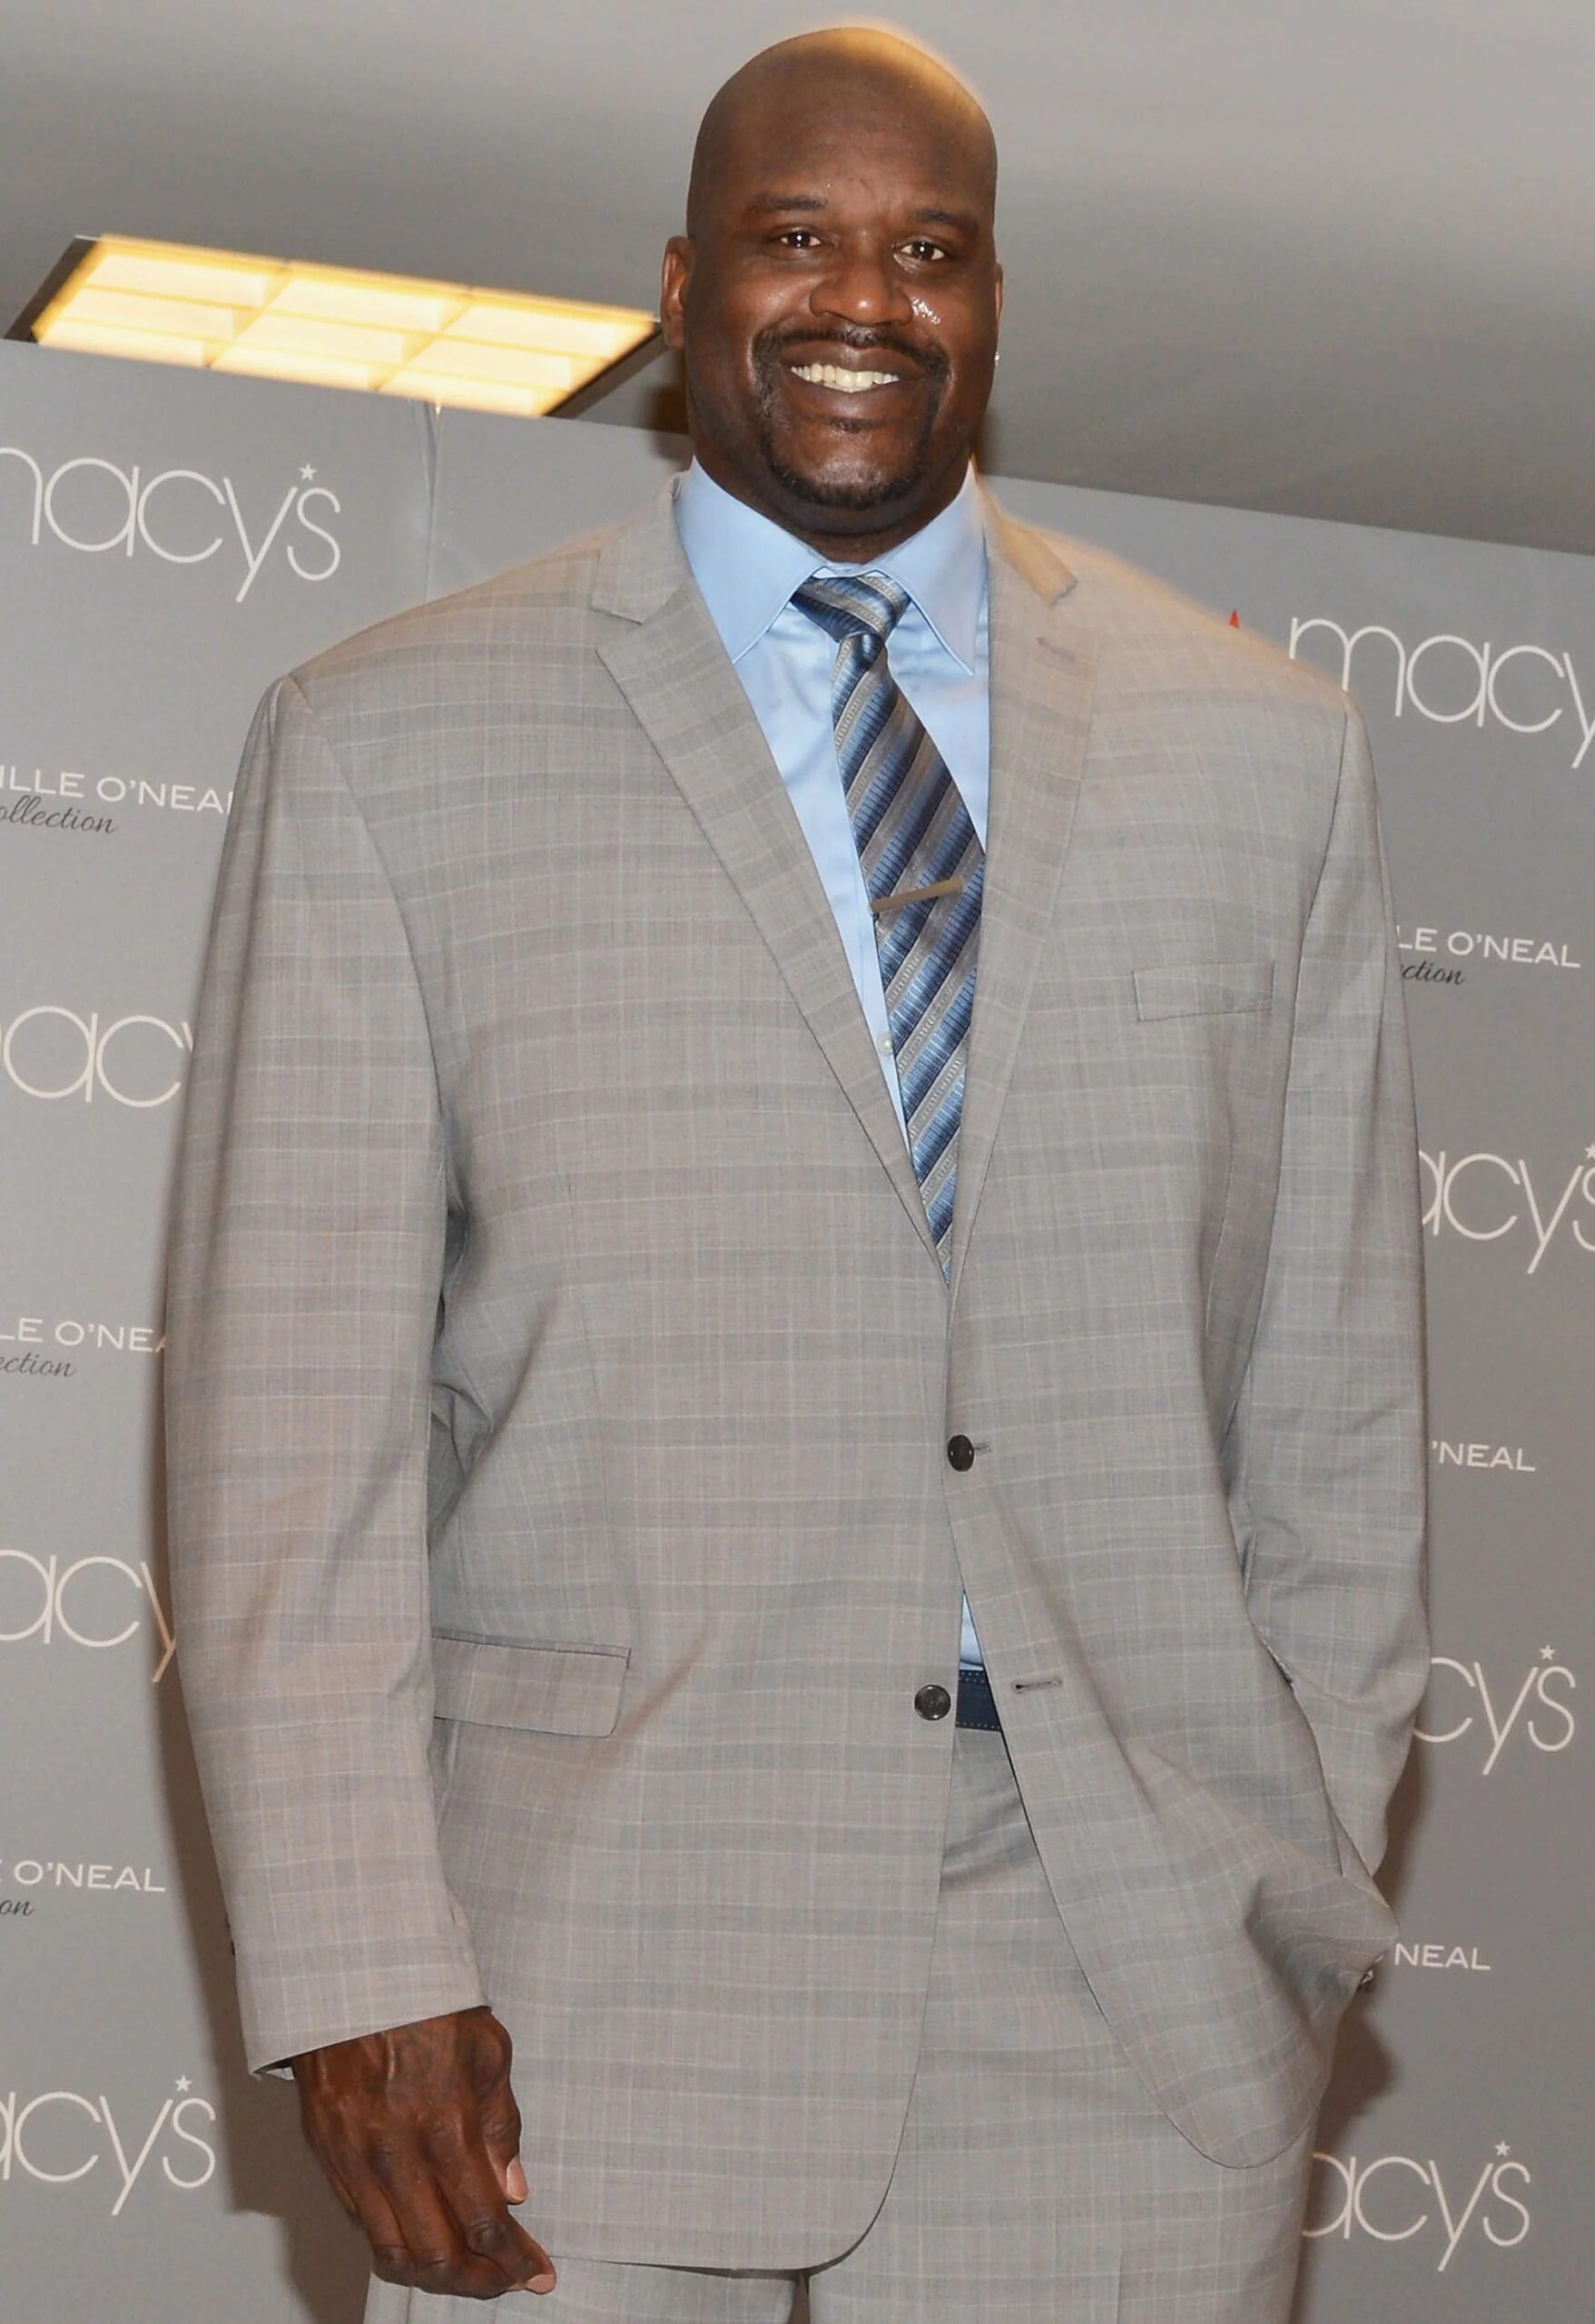 Richest NBA Players of All Time- Shaquille O'Neal